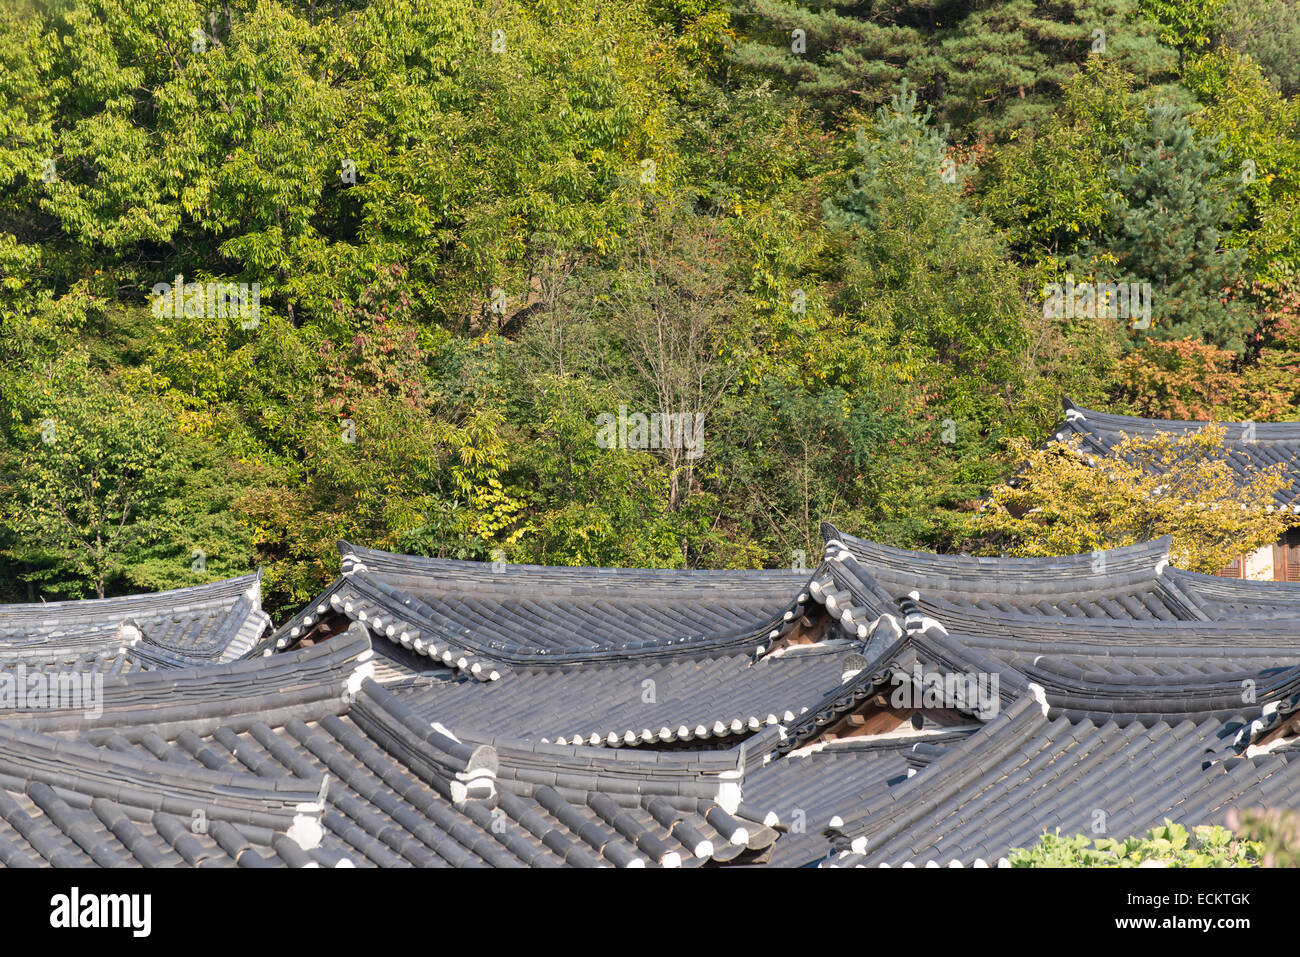 tiled roof of Korean traditional Architecture in a village Stock Photo